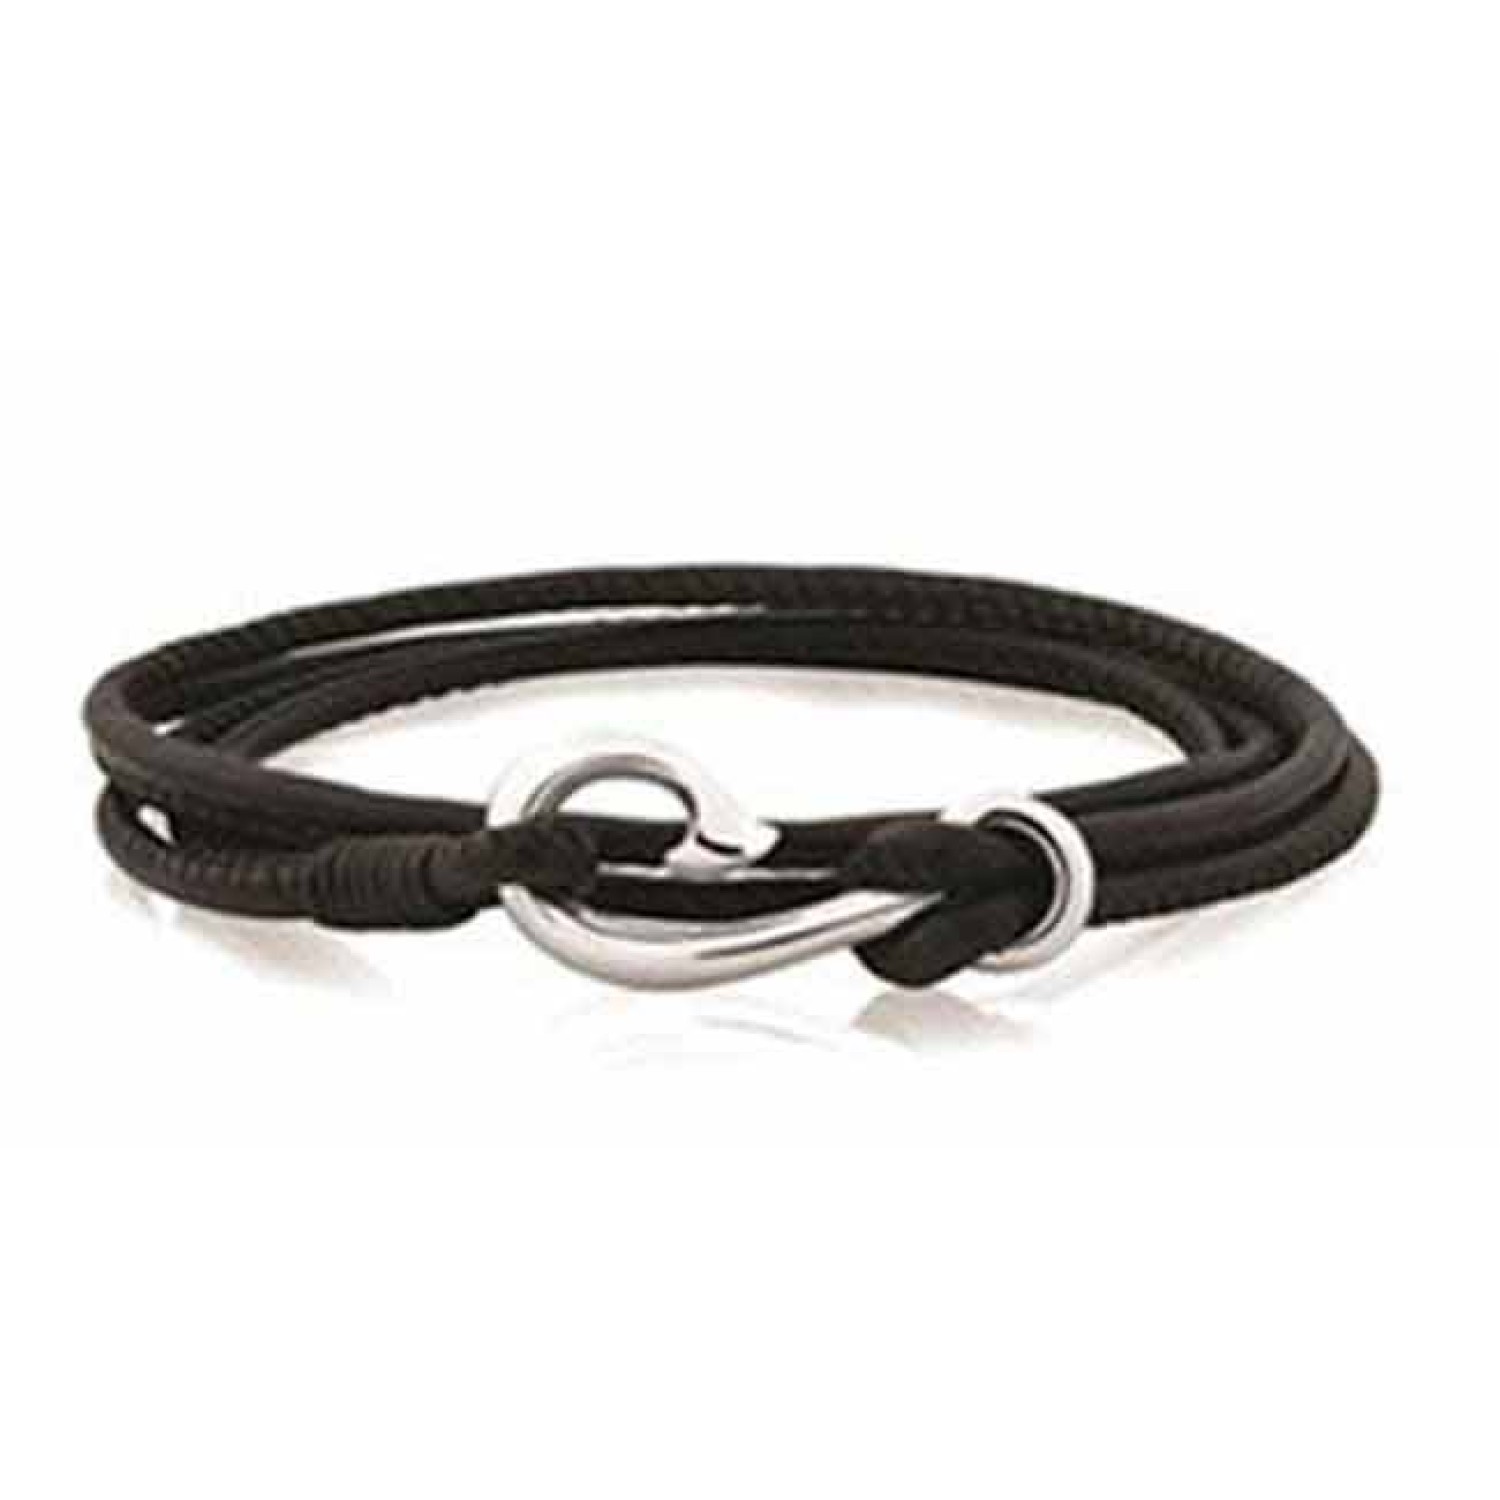 Evolve Safe Travel Wrap Bracelet Black. The Safe Travel Wrap Bracelet features a sterling silver safe travel hook on soft leather, promising protection and safety as you explore the world. This bracelet wraps around your wrist twice and loops onto the fis